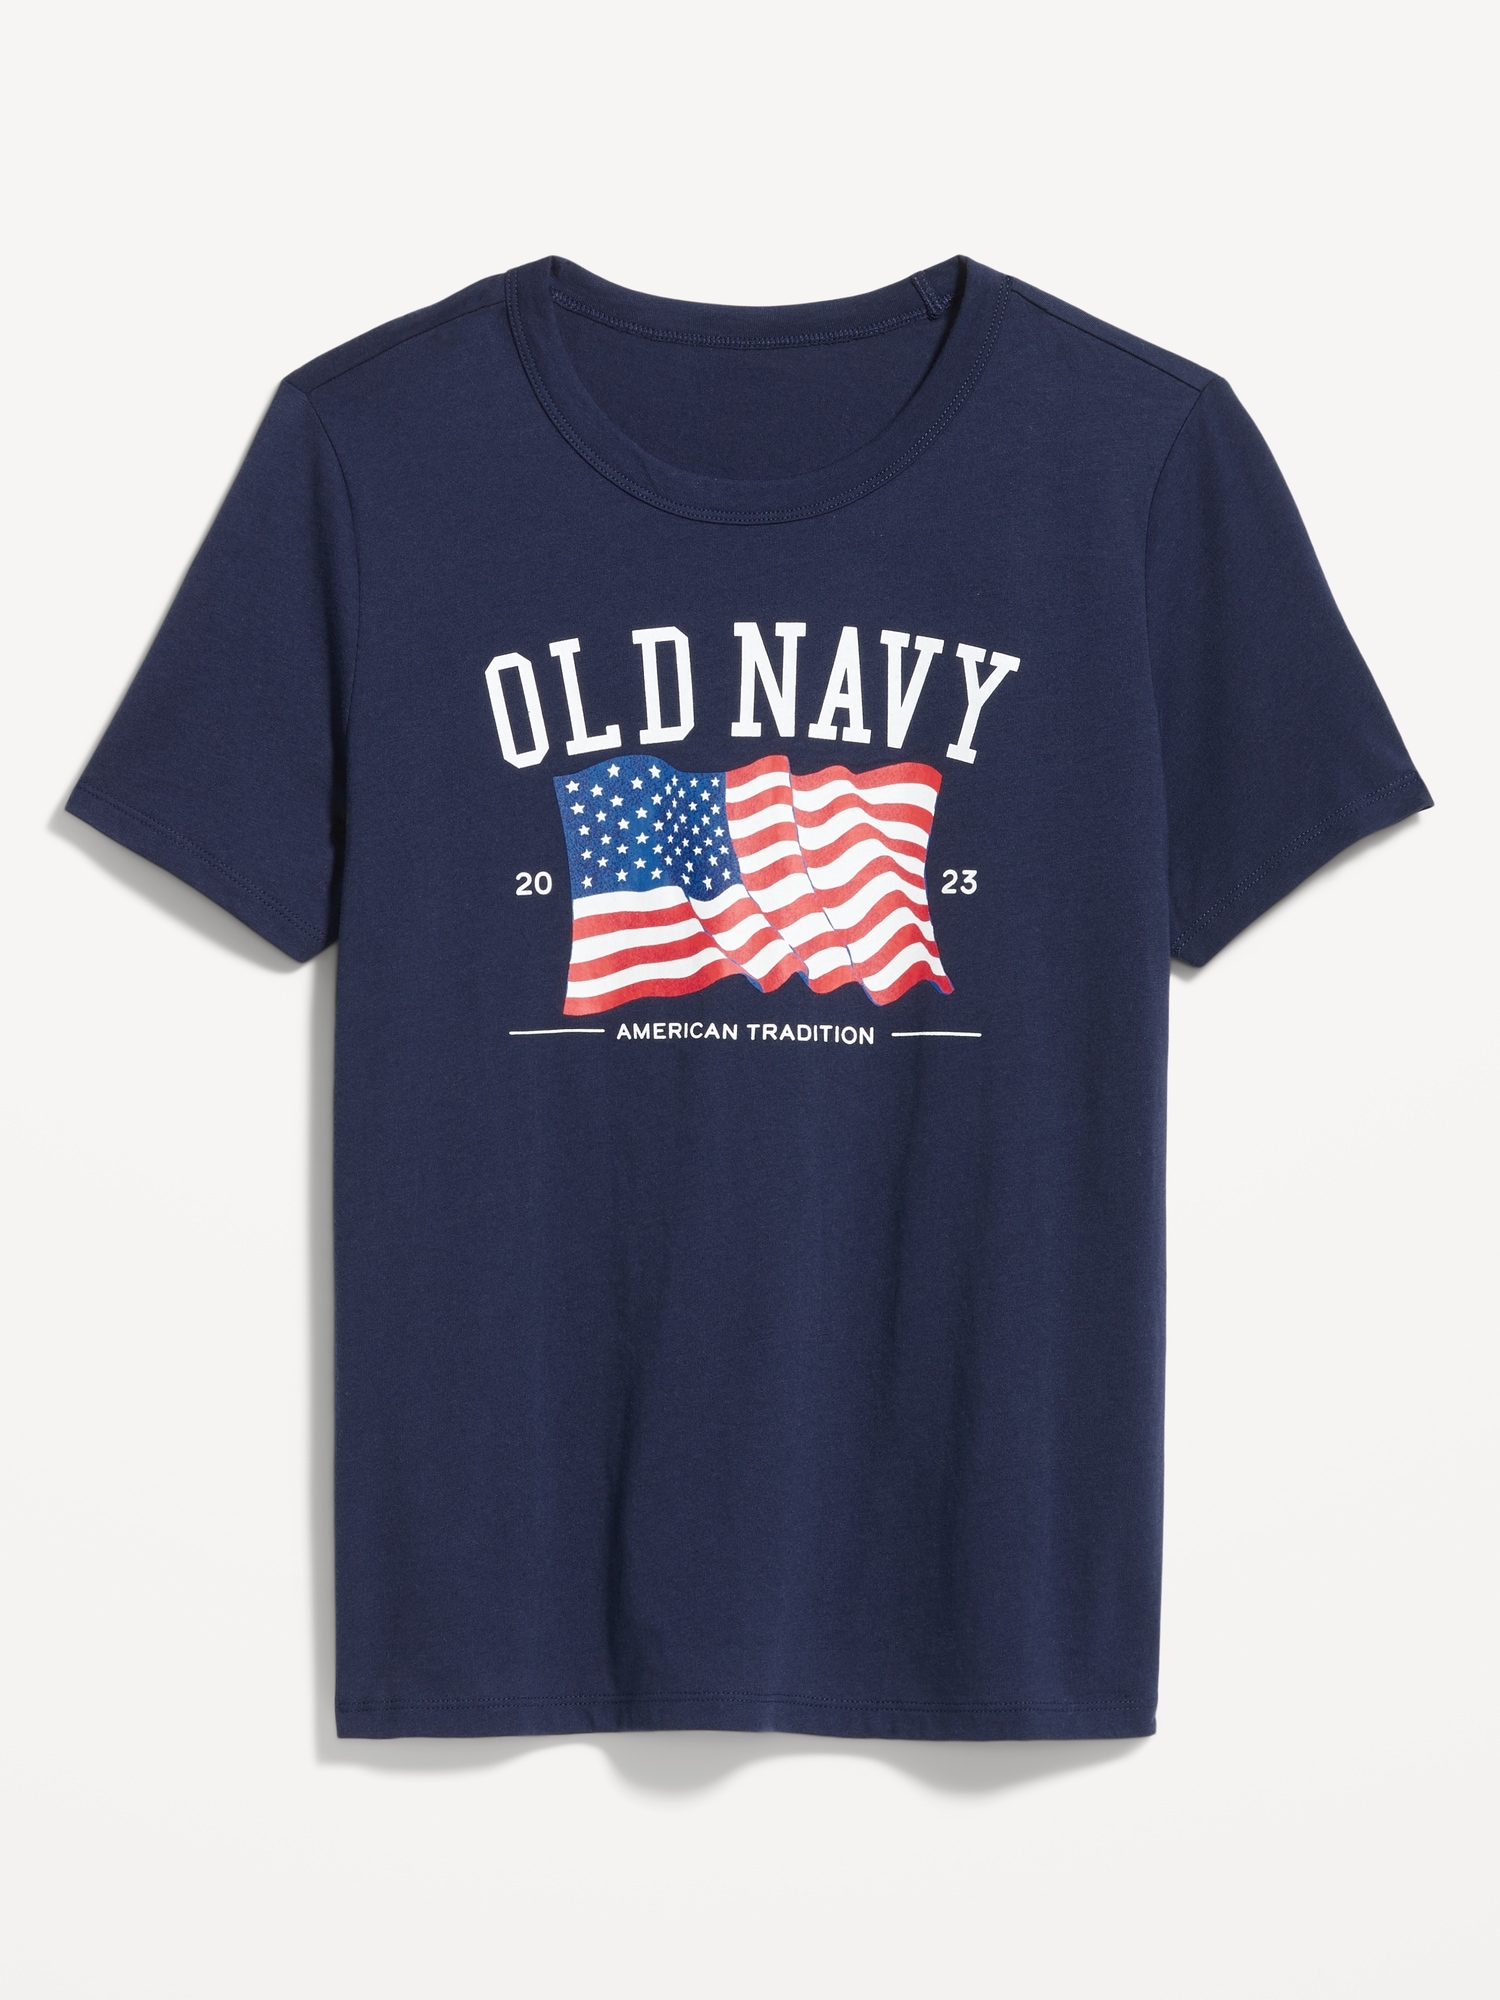 Matching "Old Navy" Flag TShirt for Women Old Navy